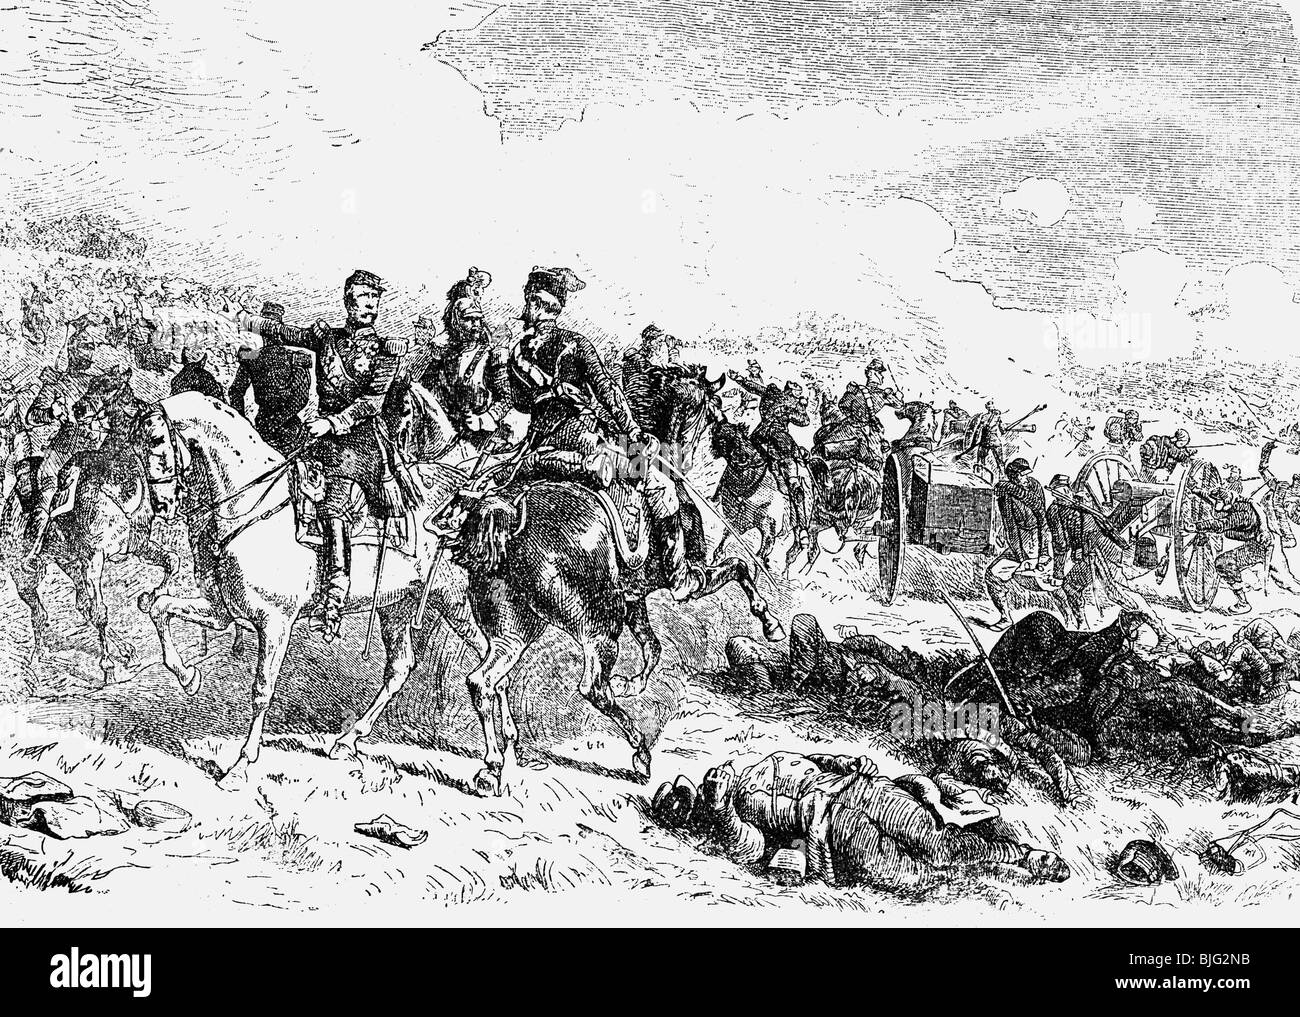 events, Franco-Prussia War 1870 - 1871, Battle of Woerth, 6.8.1870, French marshal Patrice de MacMahon and his staff, wood engraving, 19th century, Franco - Prussian, France, Alsace, Froeschwiller, French Army of the Rhine, officers, historic, historical, people, Stock Photo